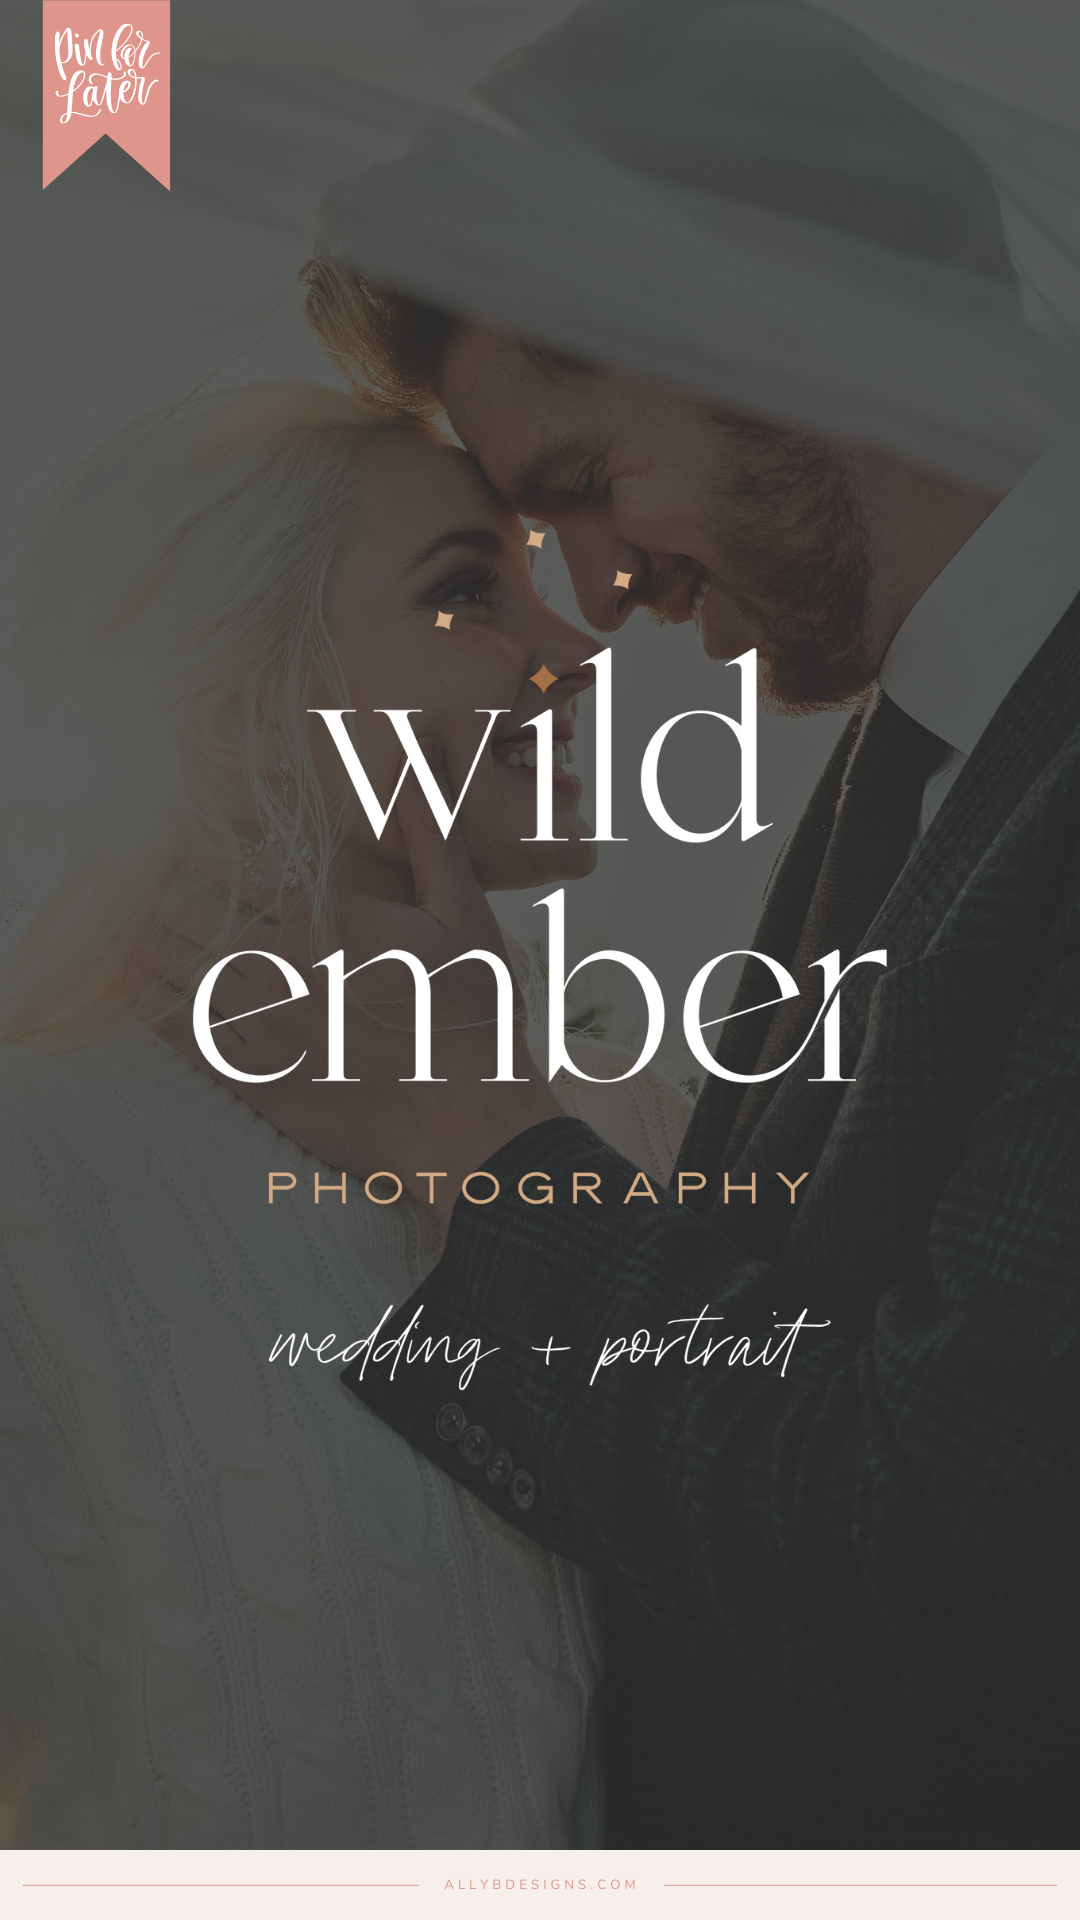 An Elopement and Wedding Photographer Brand Design: Wild Ember Photography. Branding and Website Design by Ally B Designs